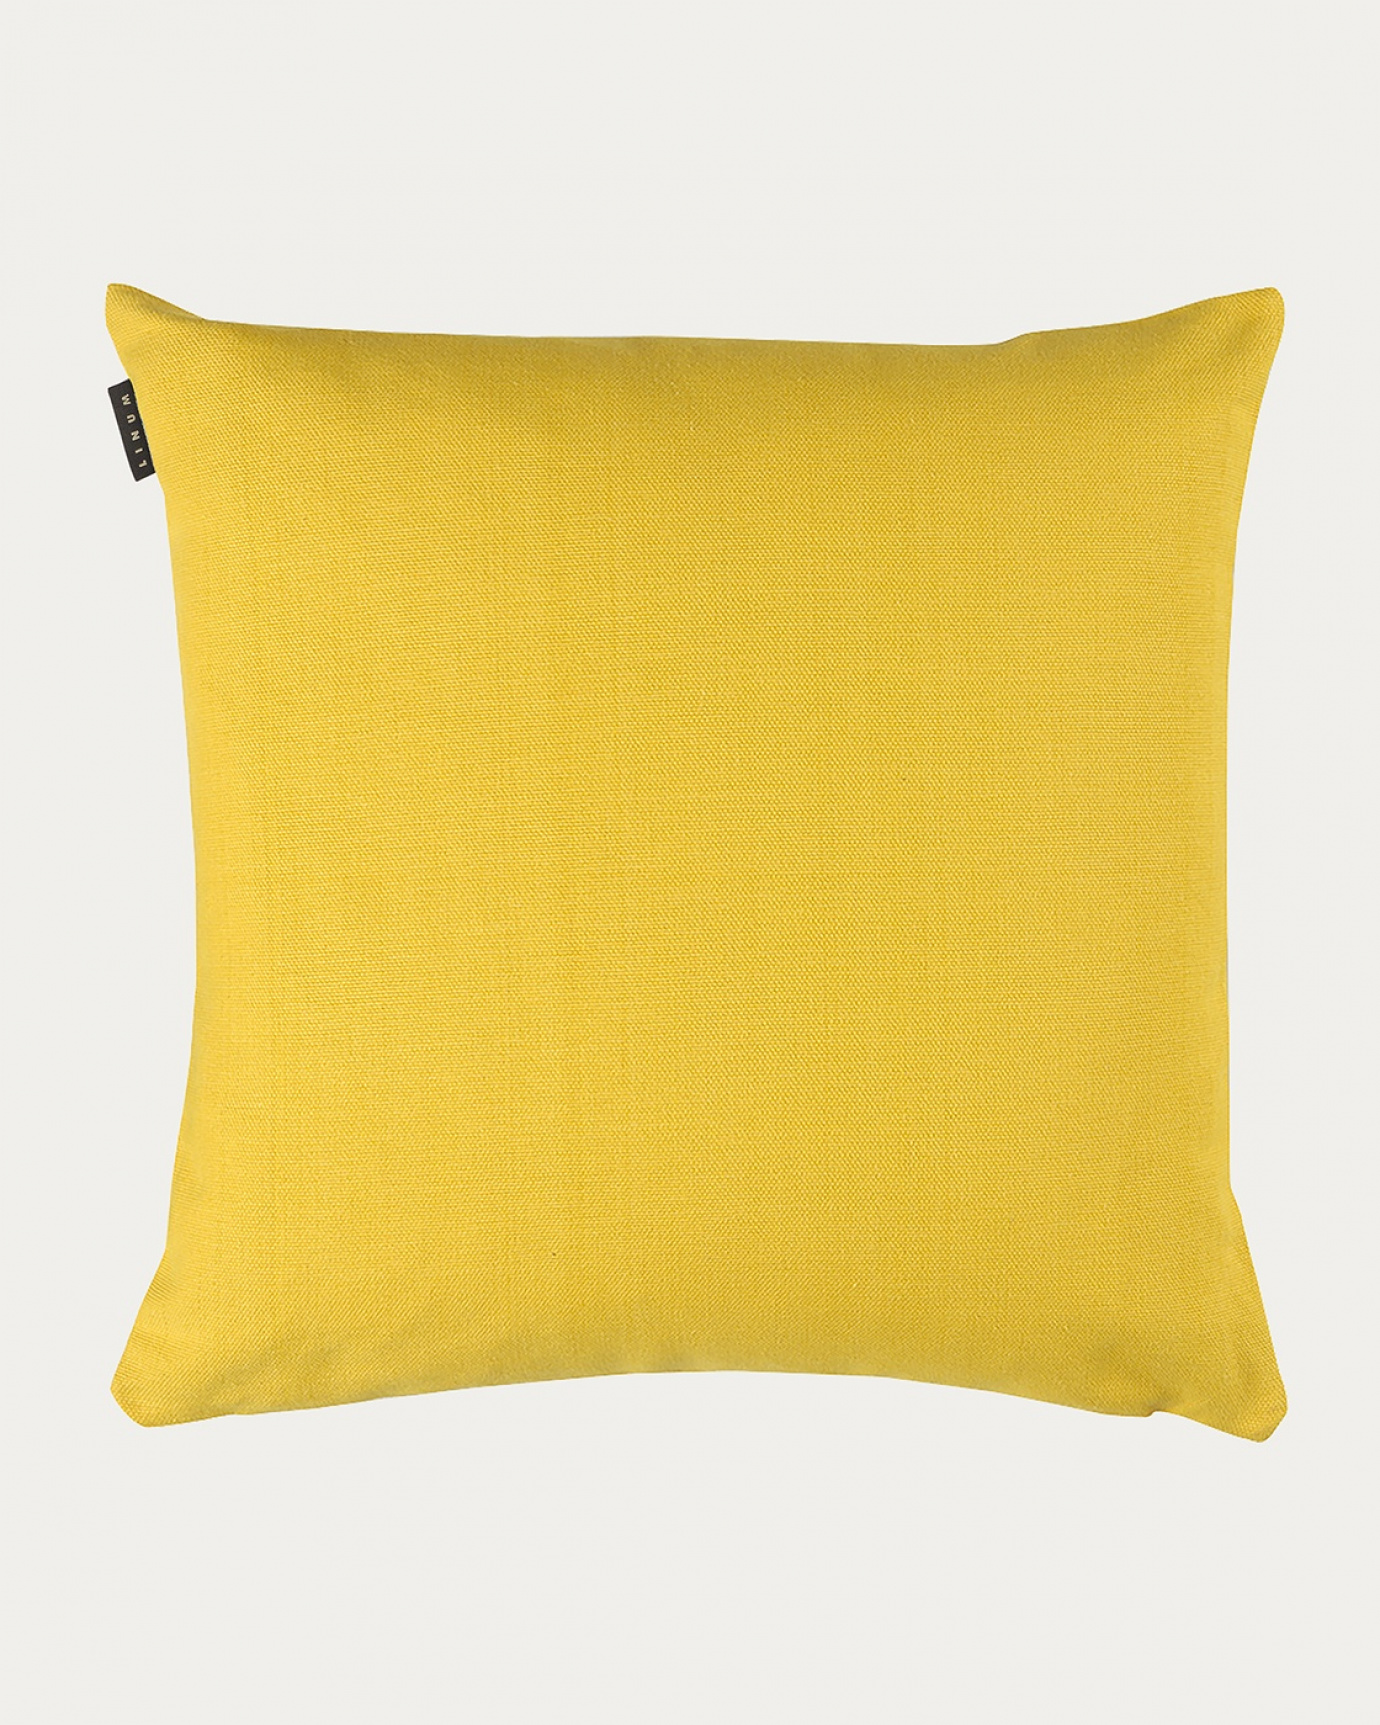 Product image tangerine yellow PEPPER cushion cover made of soft cotton from LINUM DESIGN. Easy to wash and durable for generations. Size 60x60 cm.